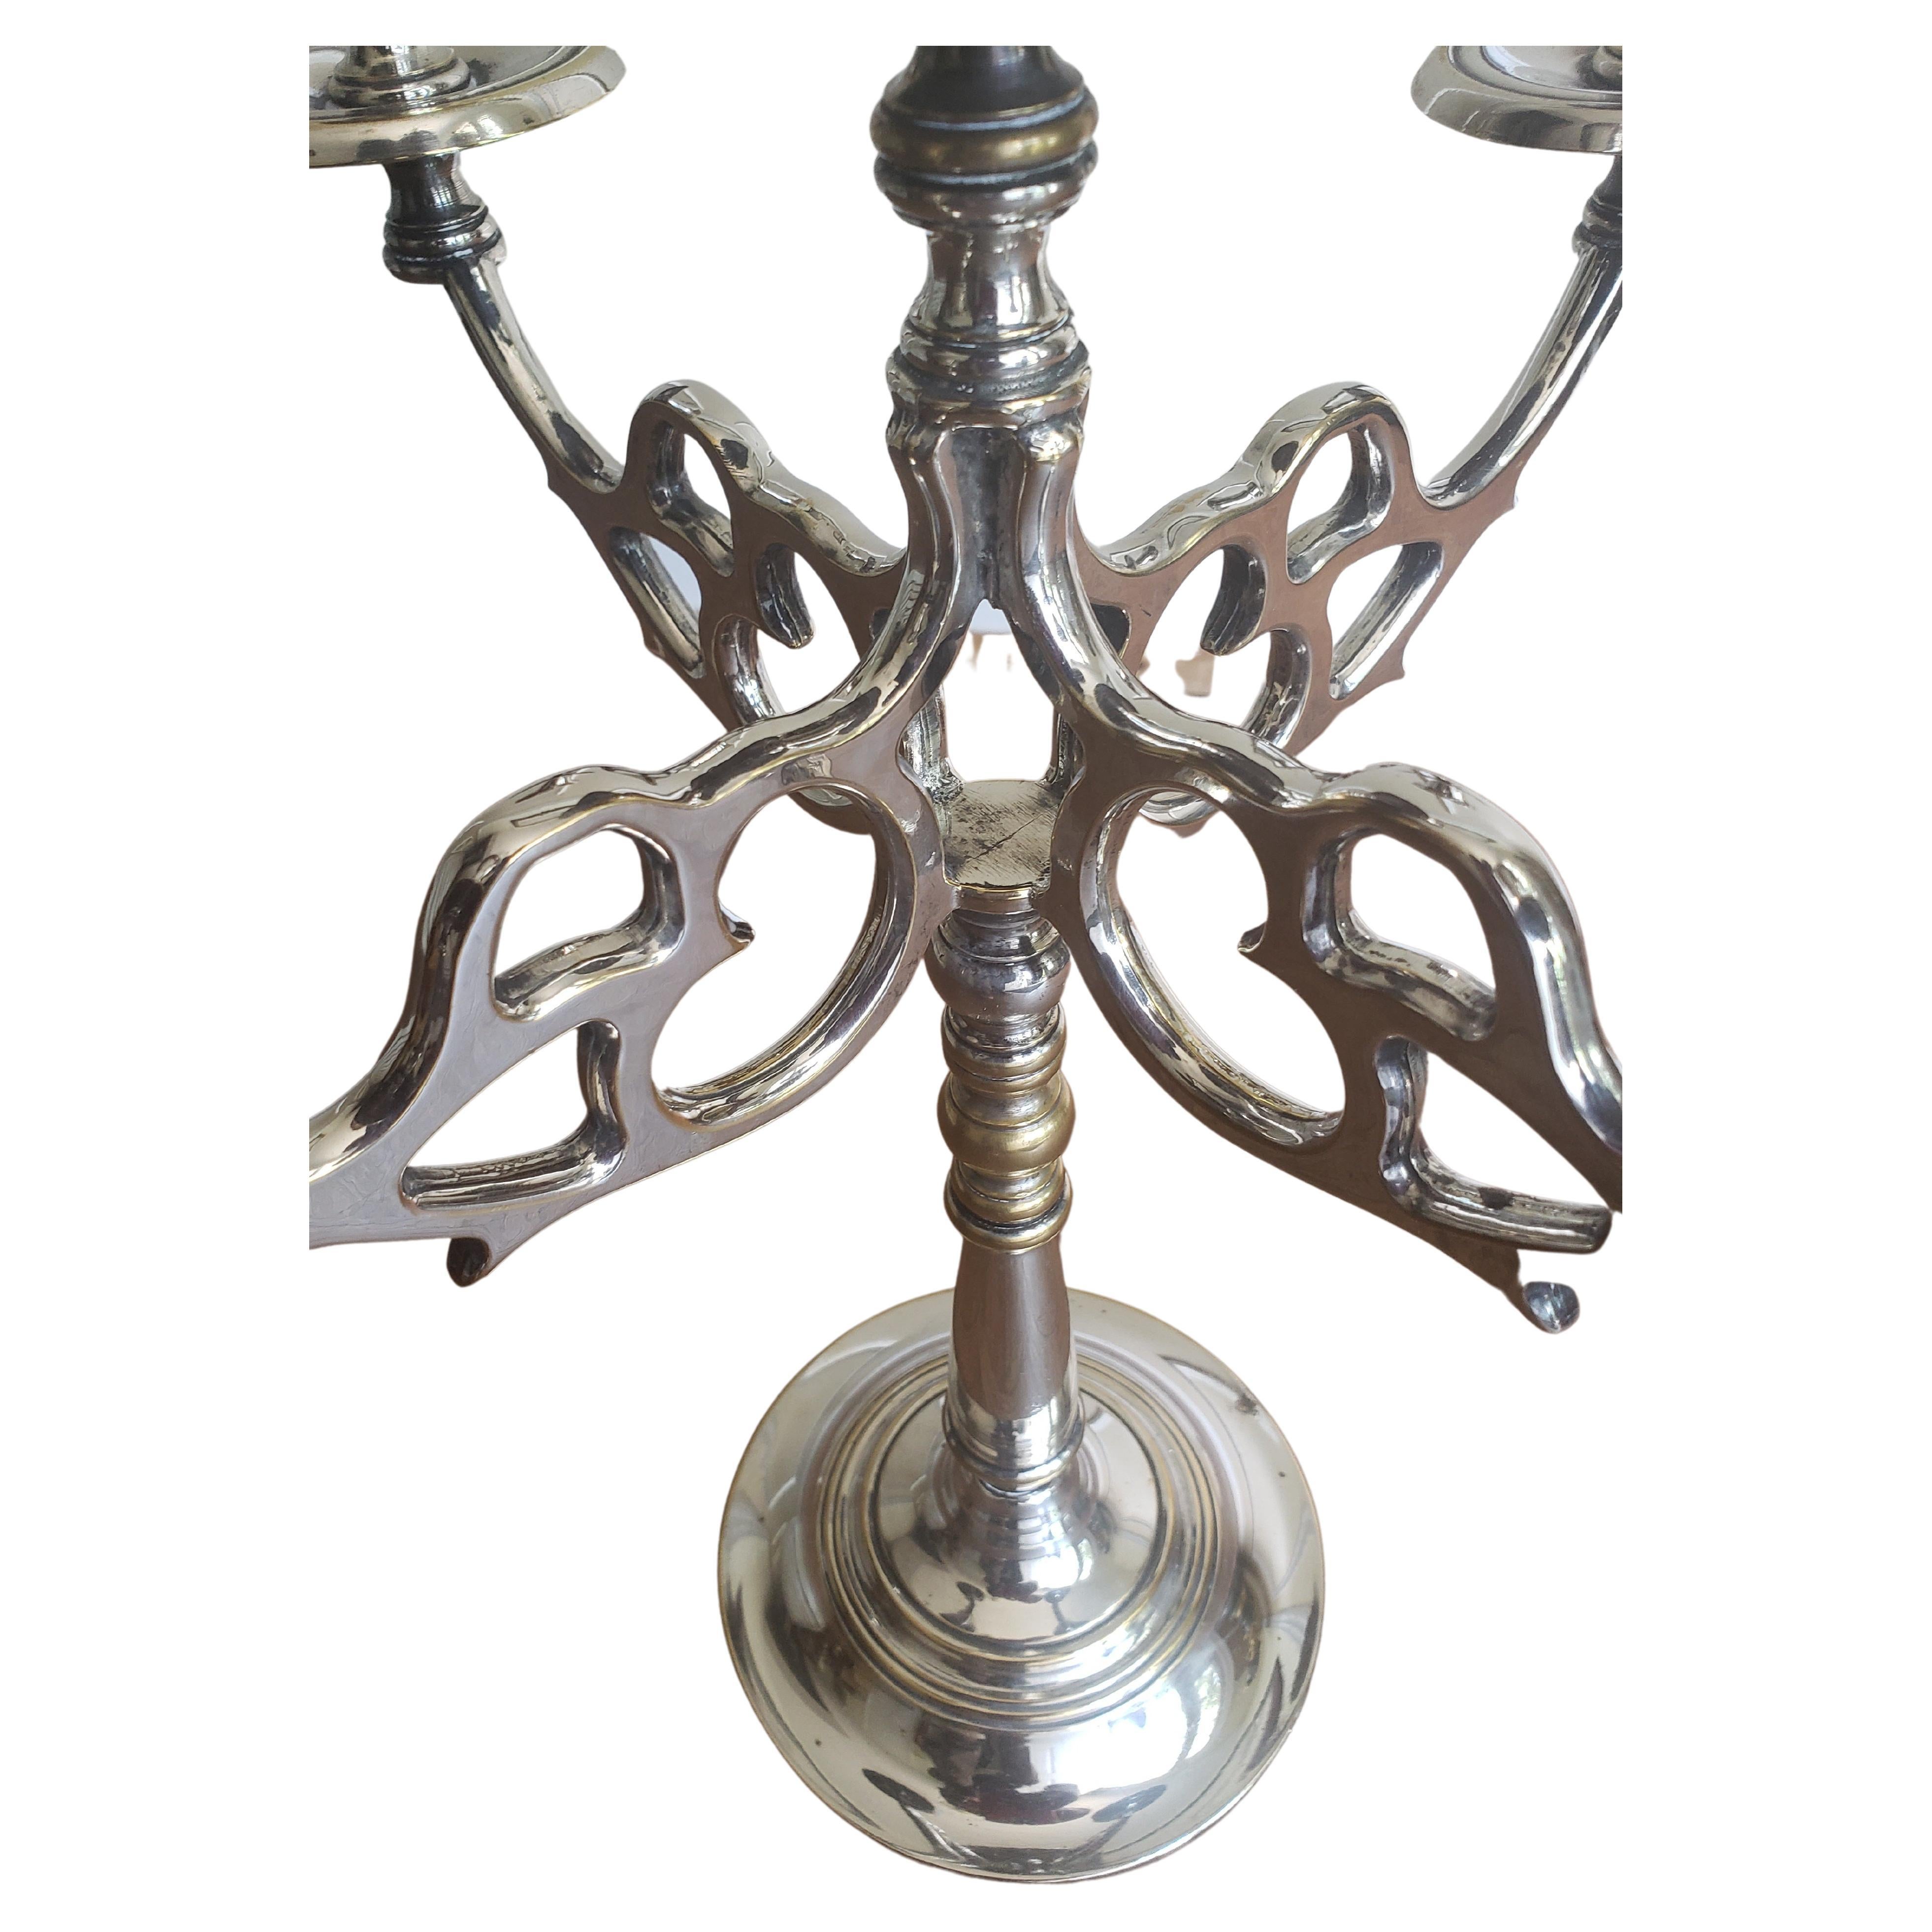 Metalwork D. W. Haber and Son Silver Plated  Art Nouveau Silver Plated 5 Arm Candelabrum For Sale